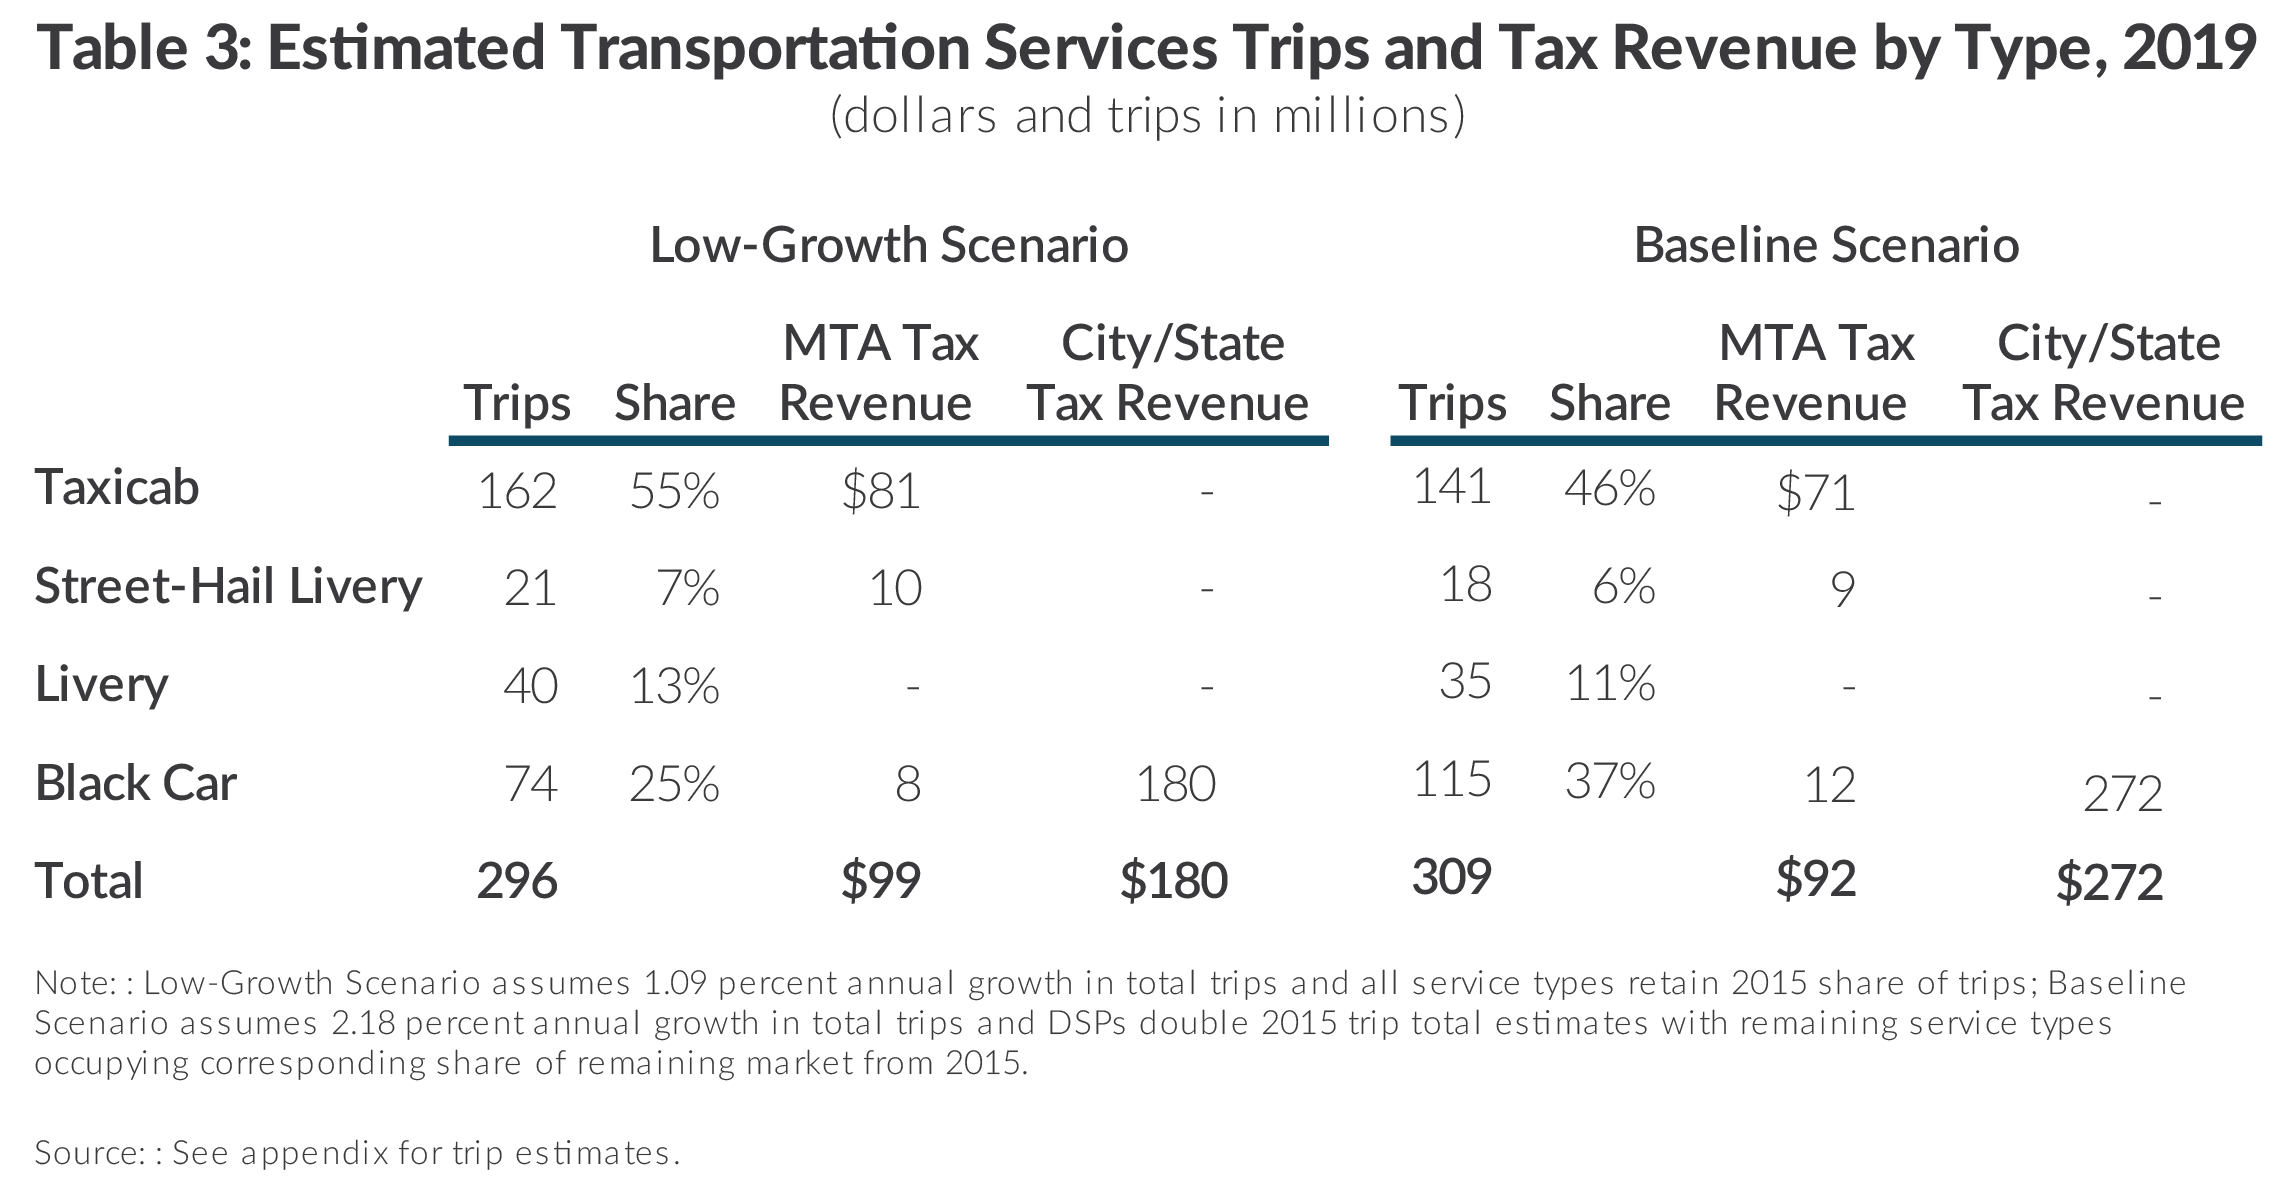 Table showing estimates of trips and tax revenue by Taxi and Limousine Commission vehicle type, includes yellow taxicabs, street hail liveries, green cabs, community cars, liveries, black cars